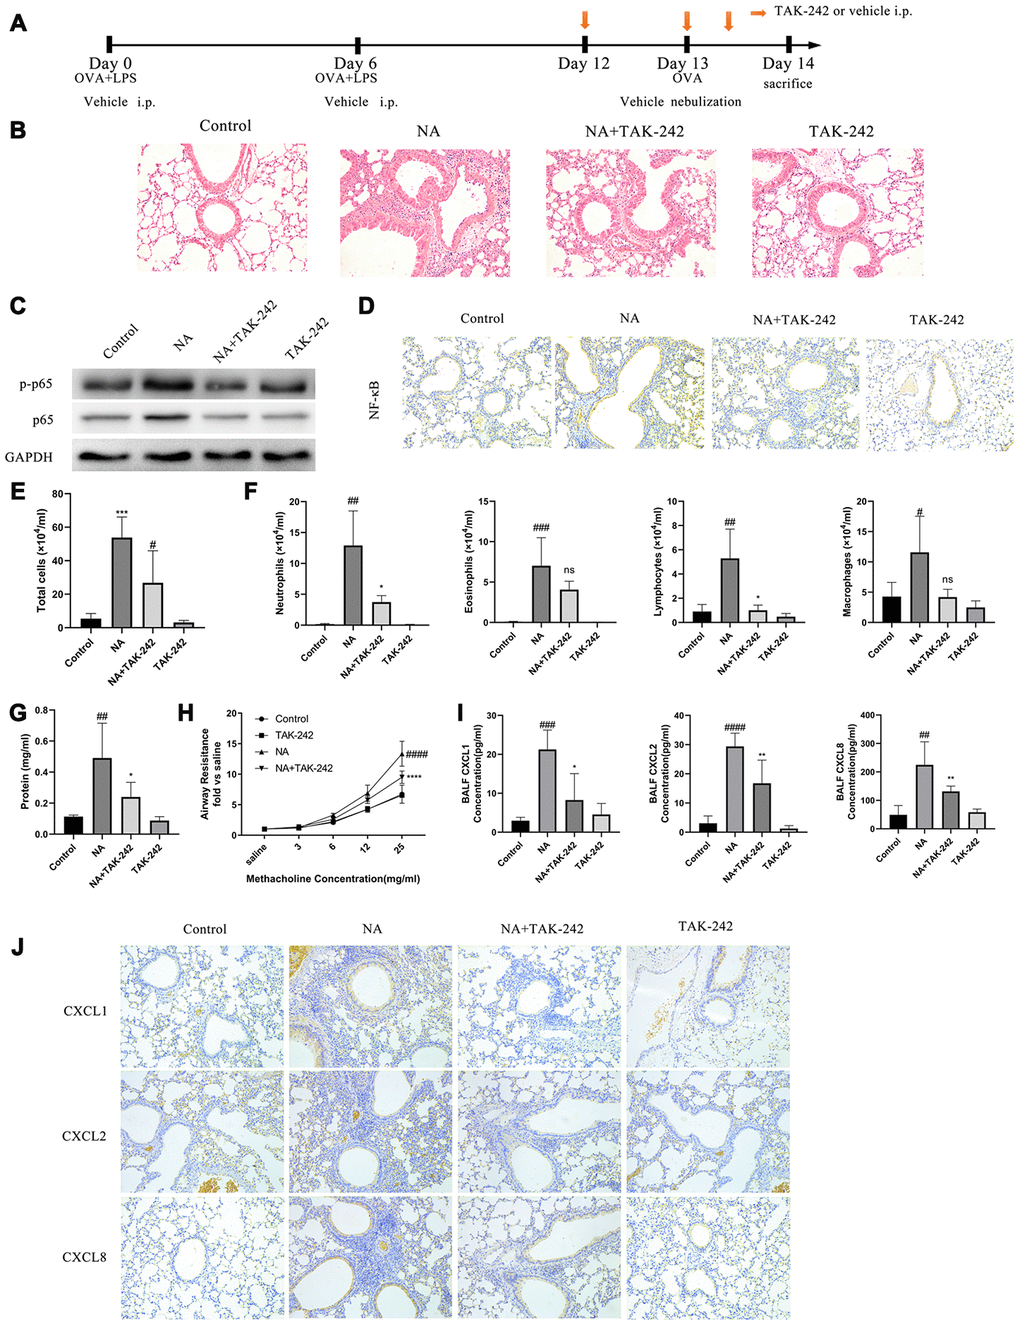 Blocking the TLR4/NF-κB pathway with TAK-242 reduced the expression of chemotactic factors and alleviate airway inflammation in NA mice. (A) Flow chart for intraperitoneal administration of TAK-242. (B) HE staining results showed that TAK-242 treatment could alleviate inflammation (200X). (C) p65 NF-κB and p-p65 NF-κB expression was measured by western blotting. (D) p65 NF-κB expression was measured by immunohistochemistry (200X). (E–G) Total cells, differential cells, and total protein were measured in the BALF of NA mice. (H) Airway resistance was measured after methacholine treatment. (I) CXCL1, CXCL2, and CXCL8 expression in the BALF of NA mice was measured by ELISA. (J) CXCL1, CXCL2, and CXCL8 expression was measured by Immunohistochemistry in the lung tissues of NA mice. #: P